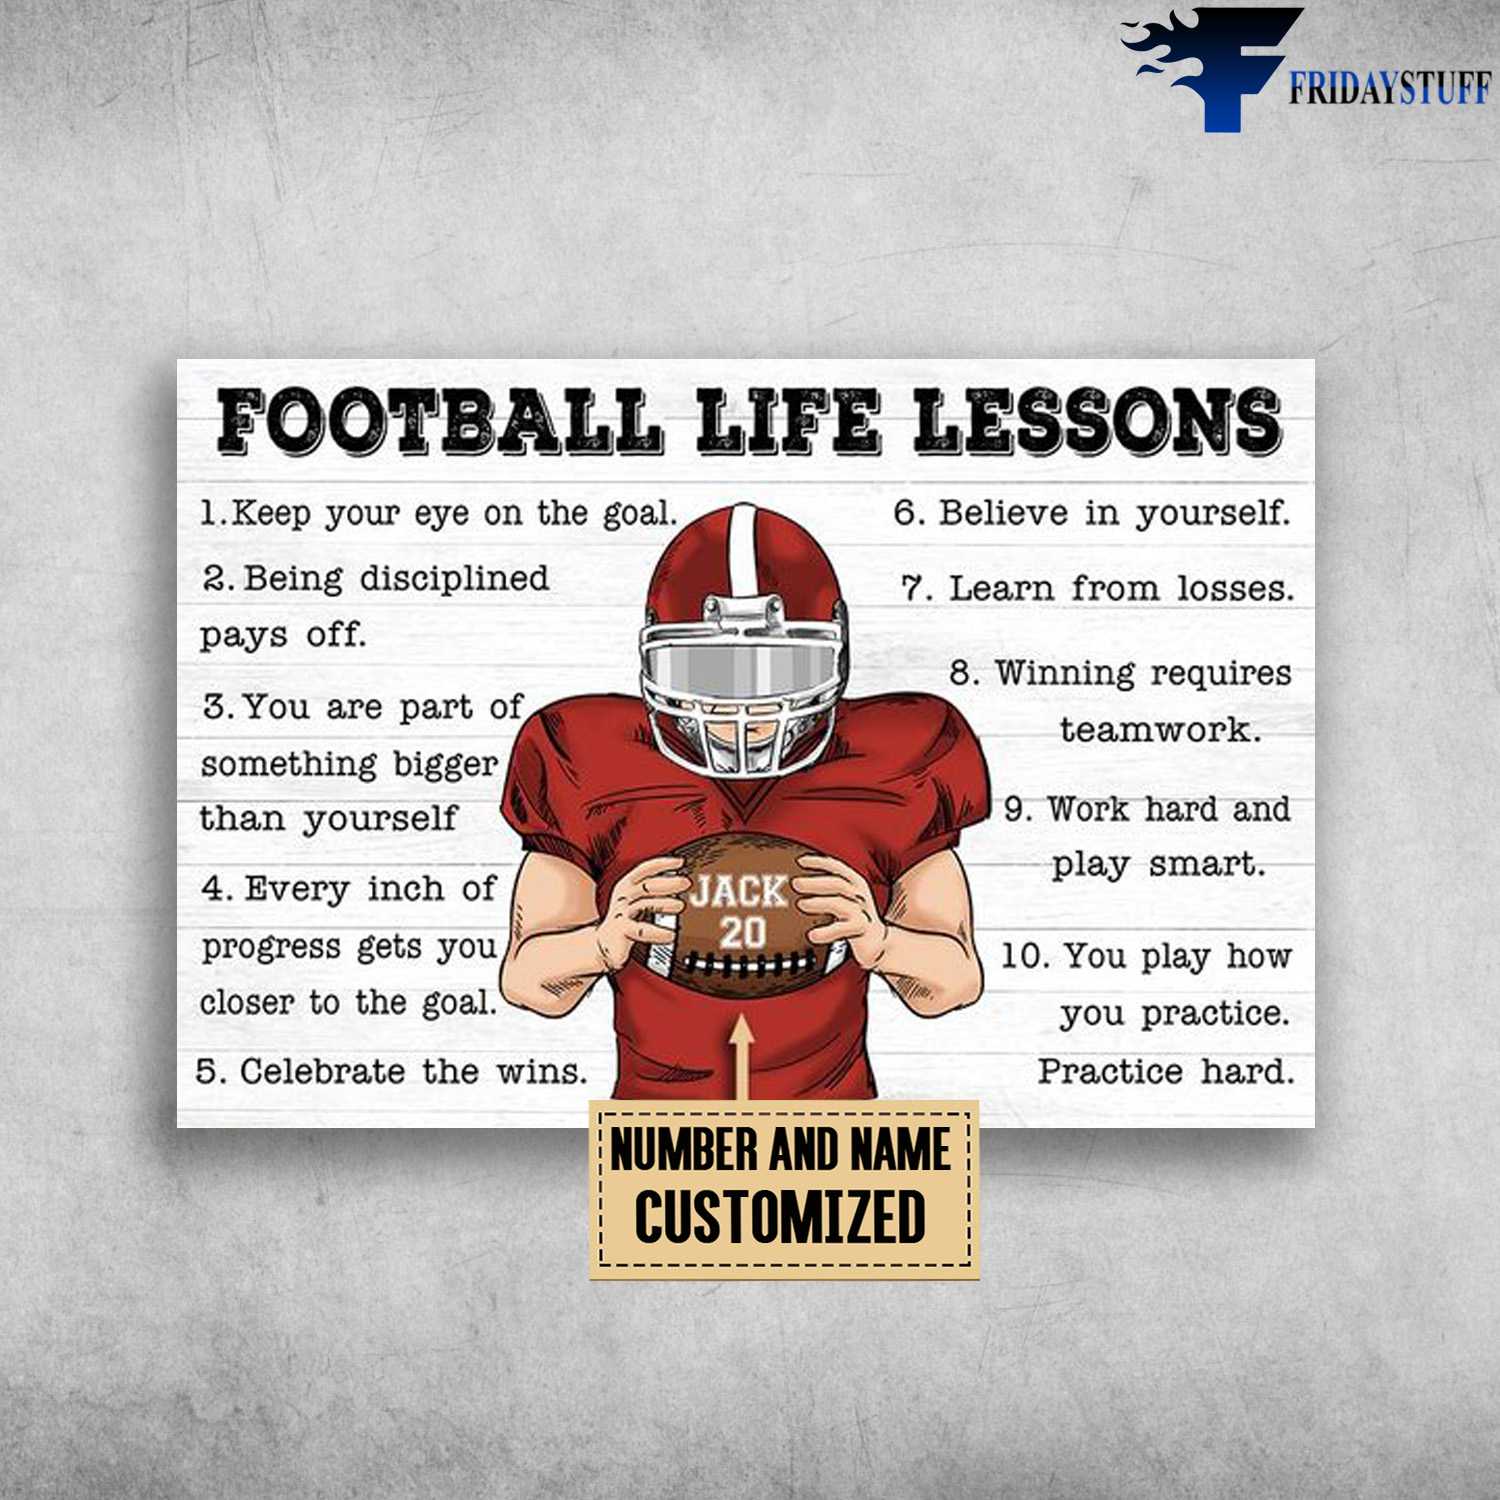 Football Poster, Football Life Lessons, Keep Your Eye On The Goal, Being Disciplined Pays Off, You Are Part Of Something, Bigger Than Yourself, Believe In Yourself